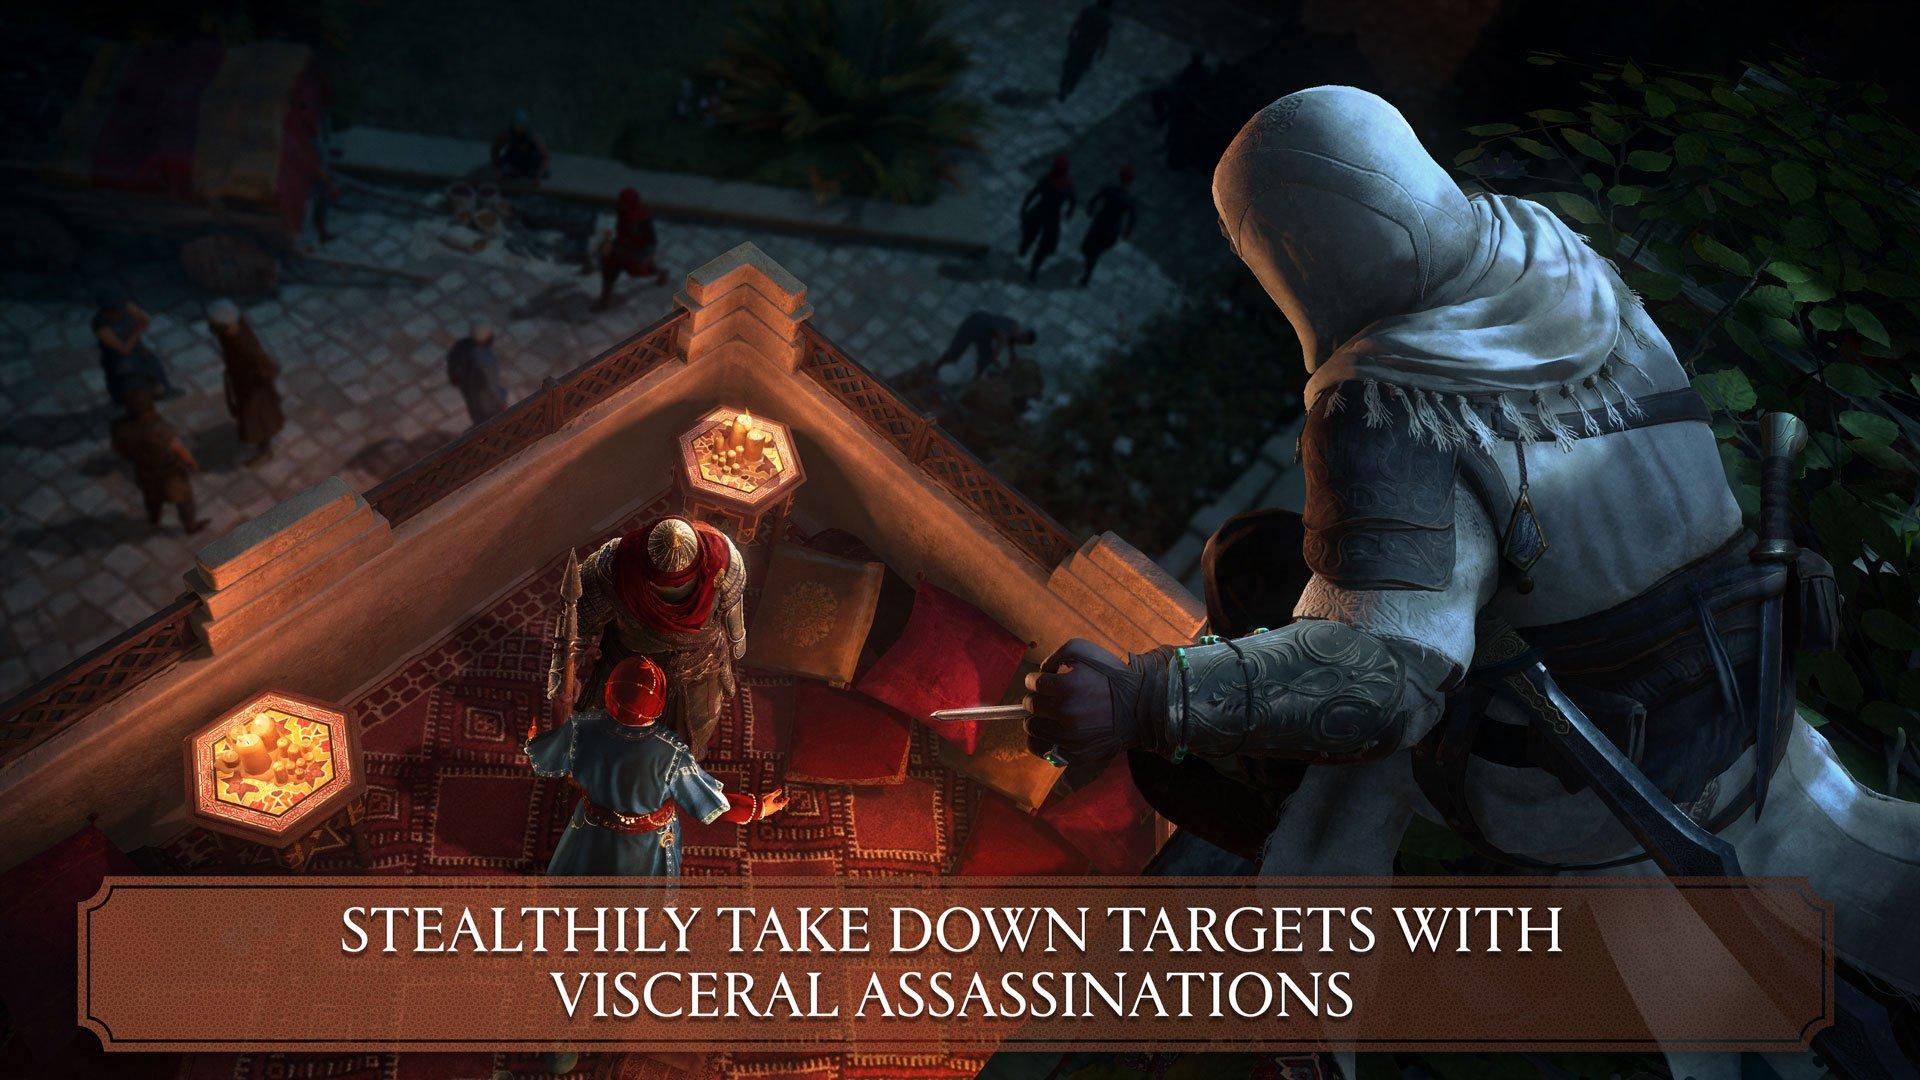 Assassin's Creed Revelations Assassinate Multiplayer Guide  Top Tier  Tactics – Videogame strategy guides, tips, and humor